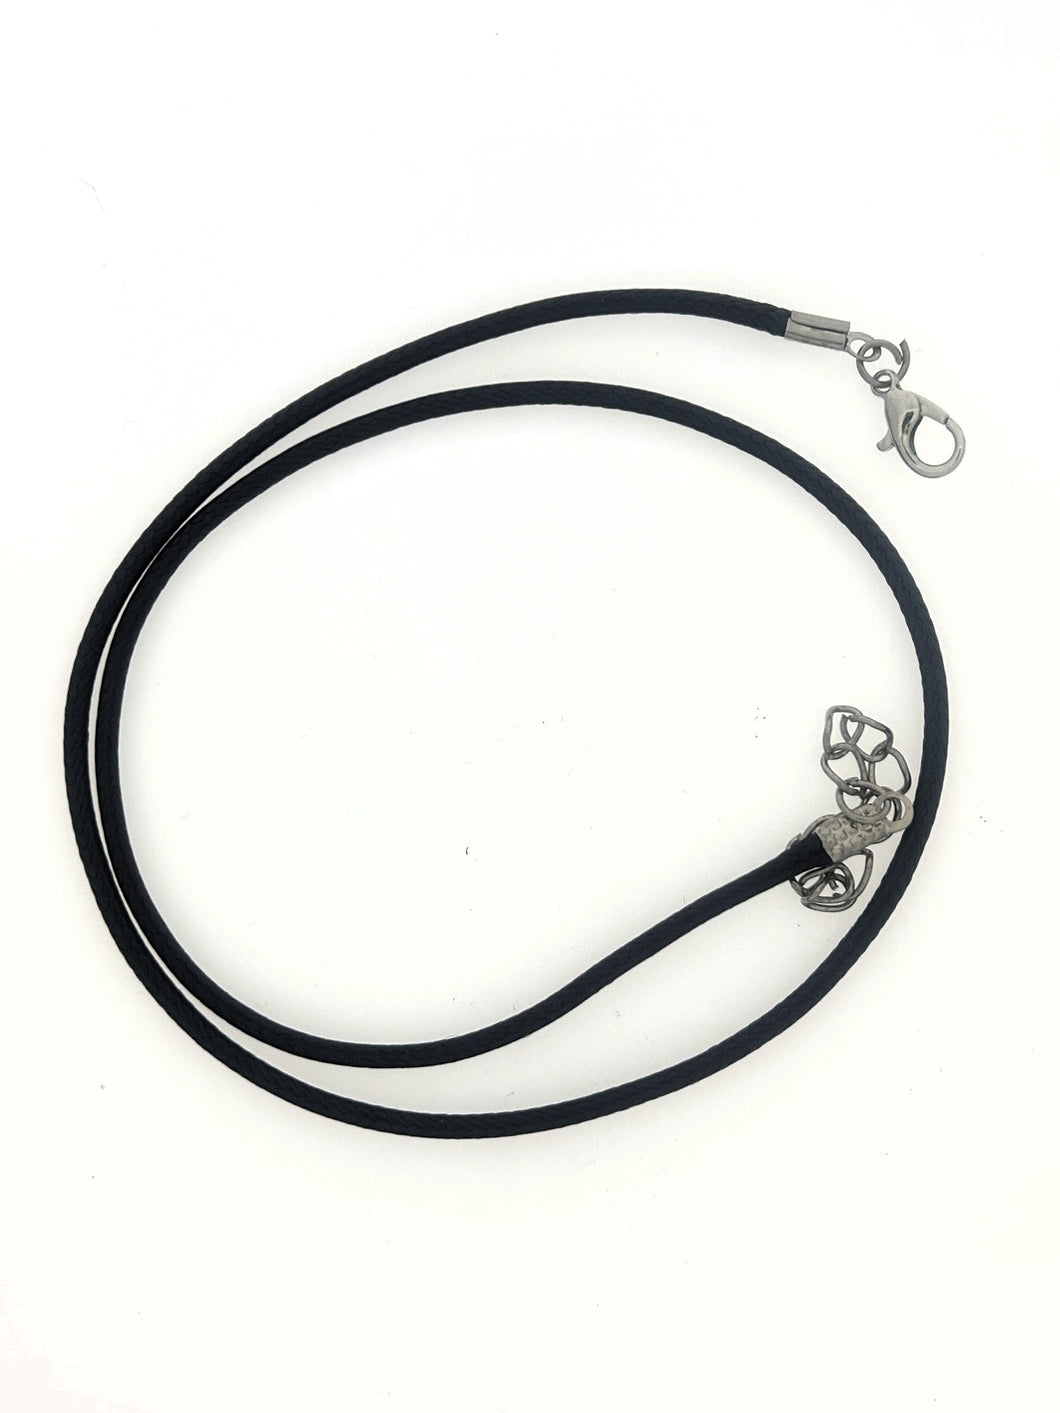 Black Waxed Necklace Cord 1.5 mm x 45cm long